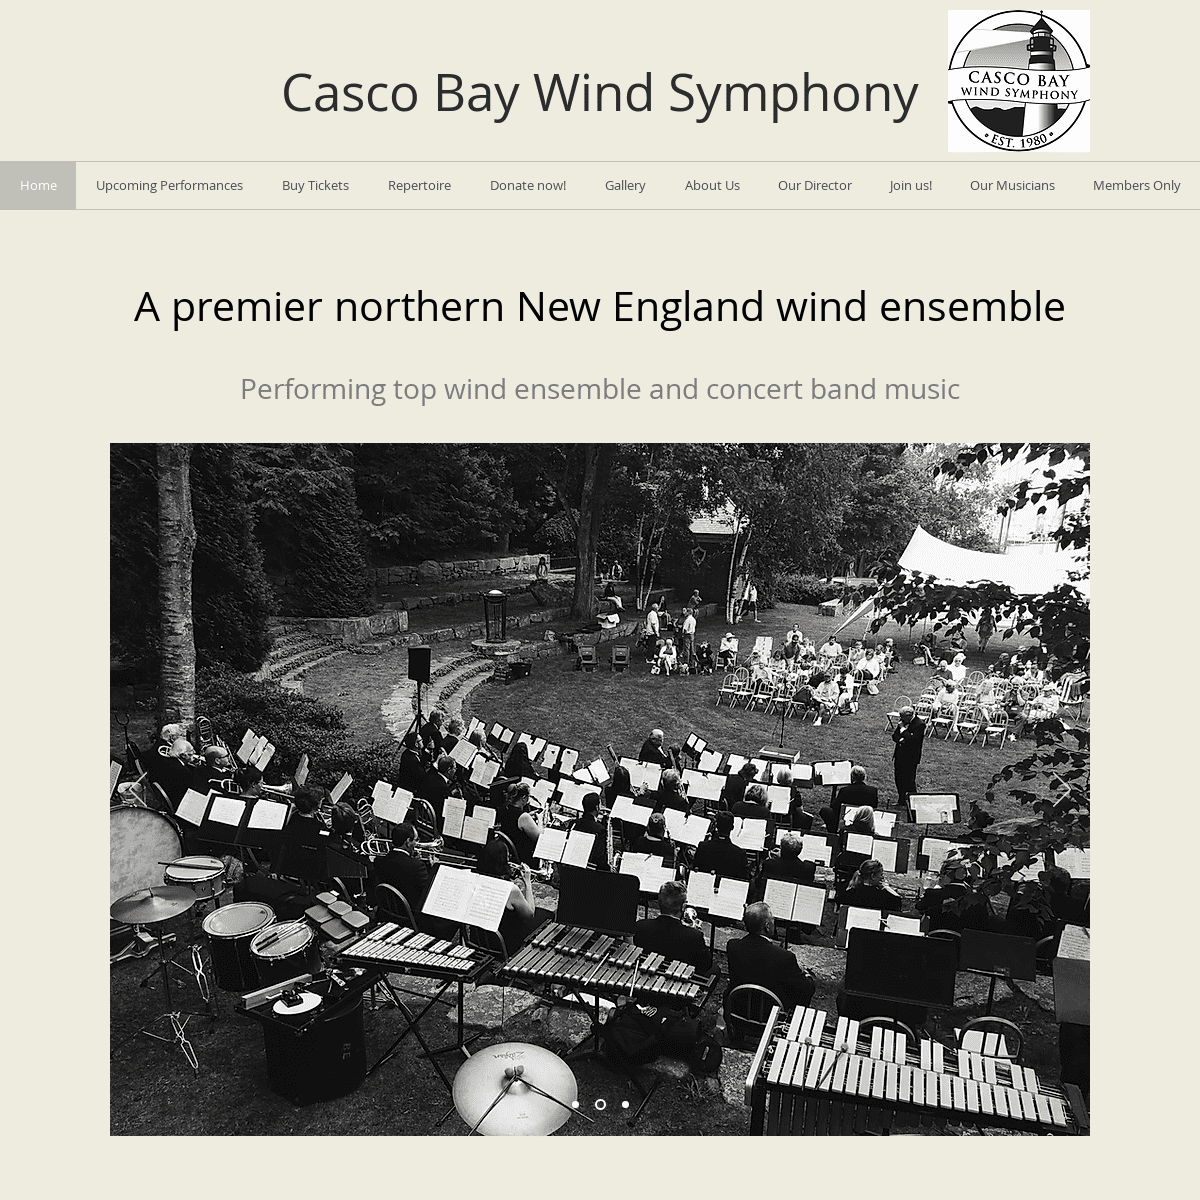 A complete backup of cascobaywindsymphony.org